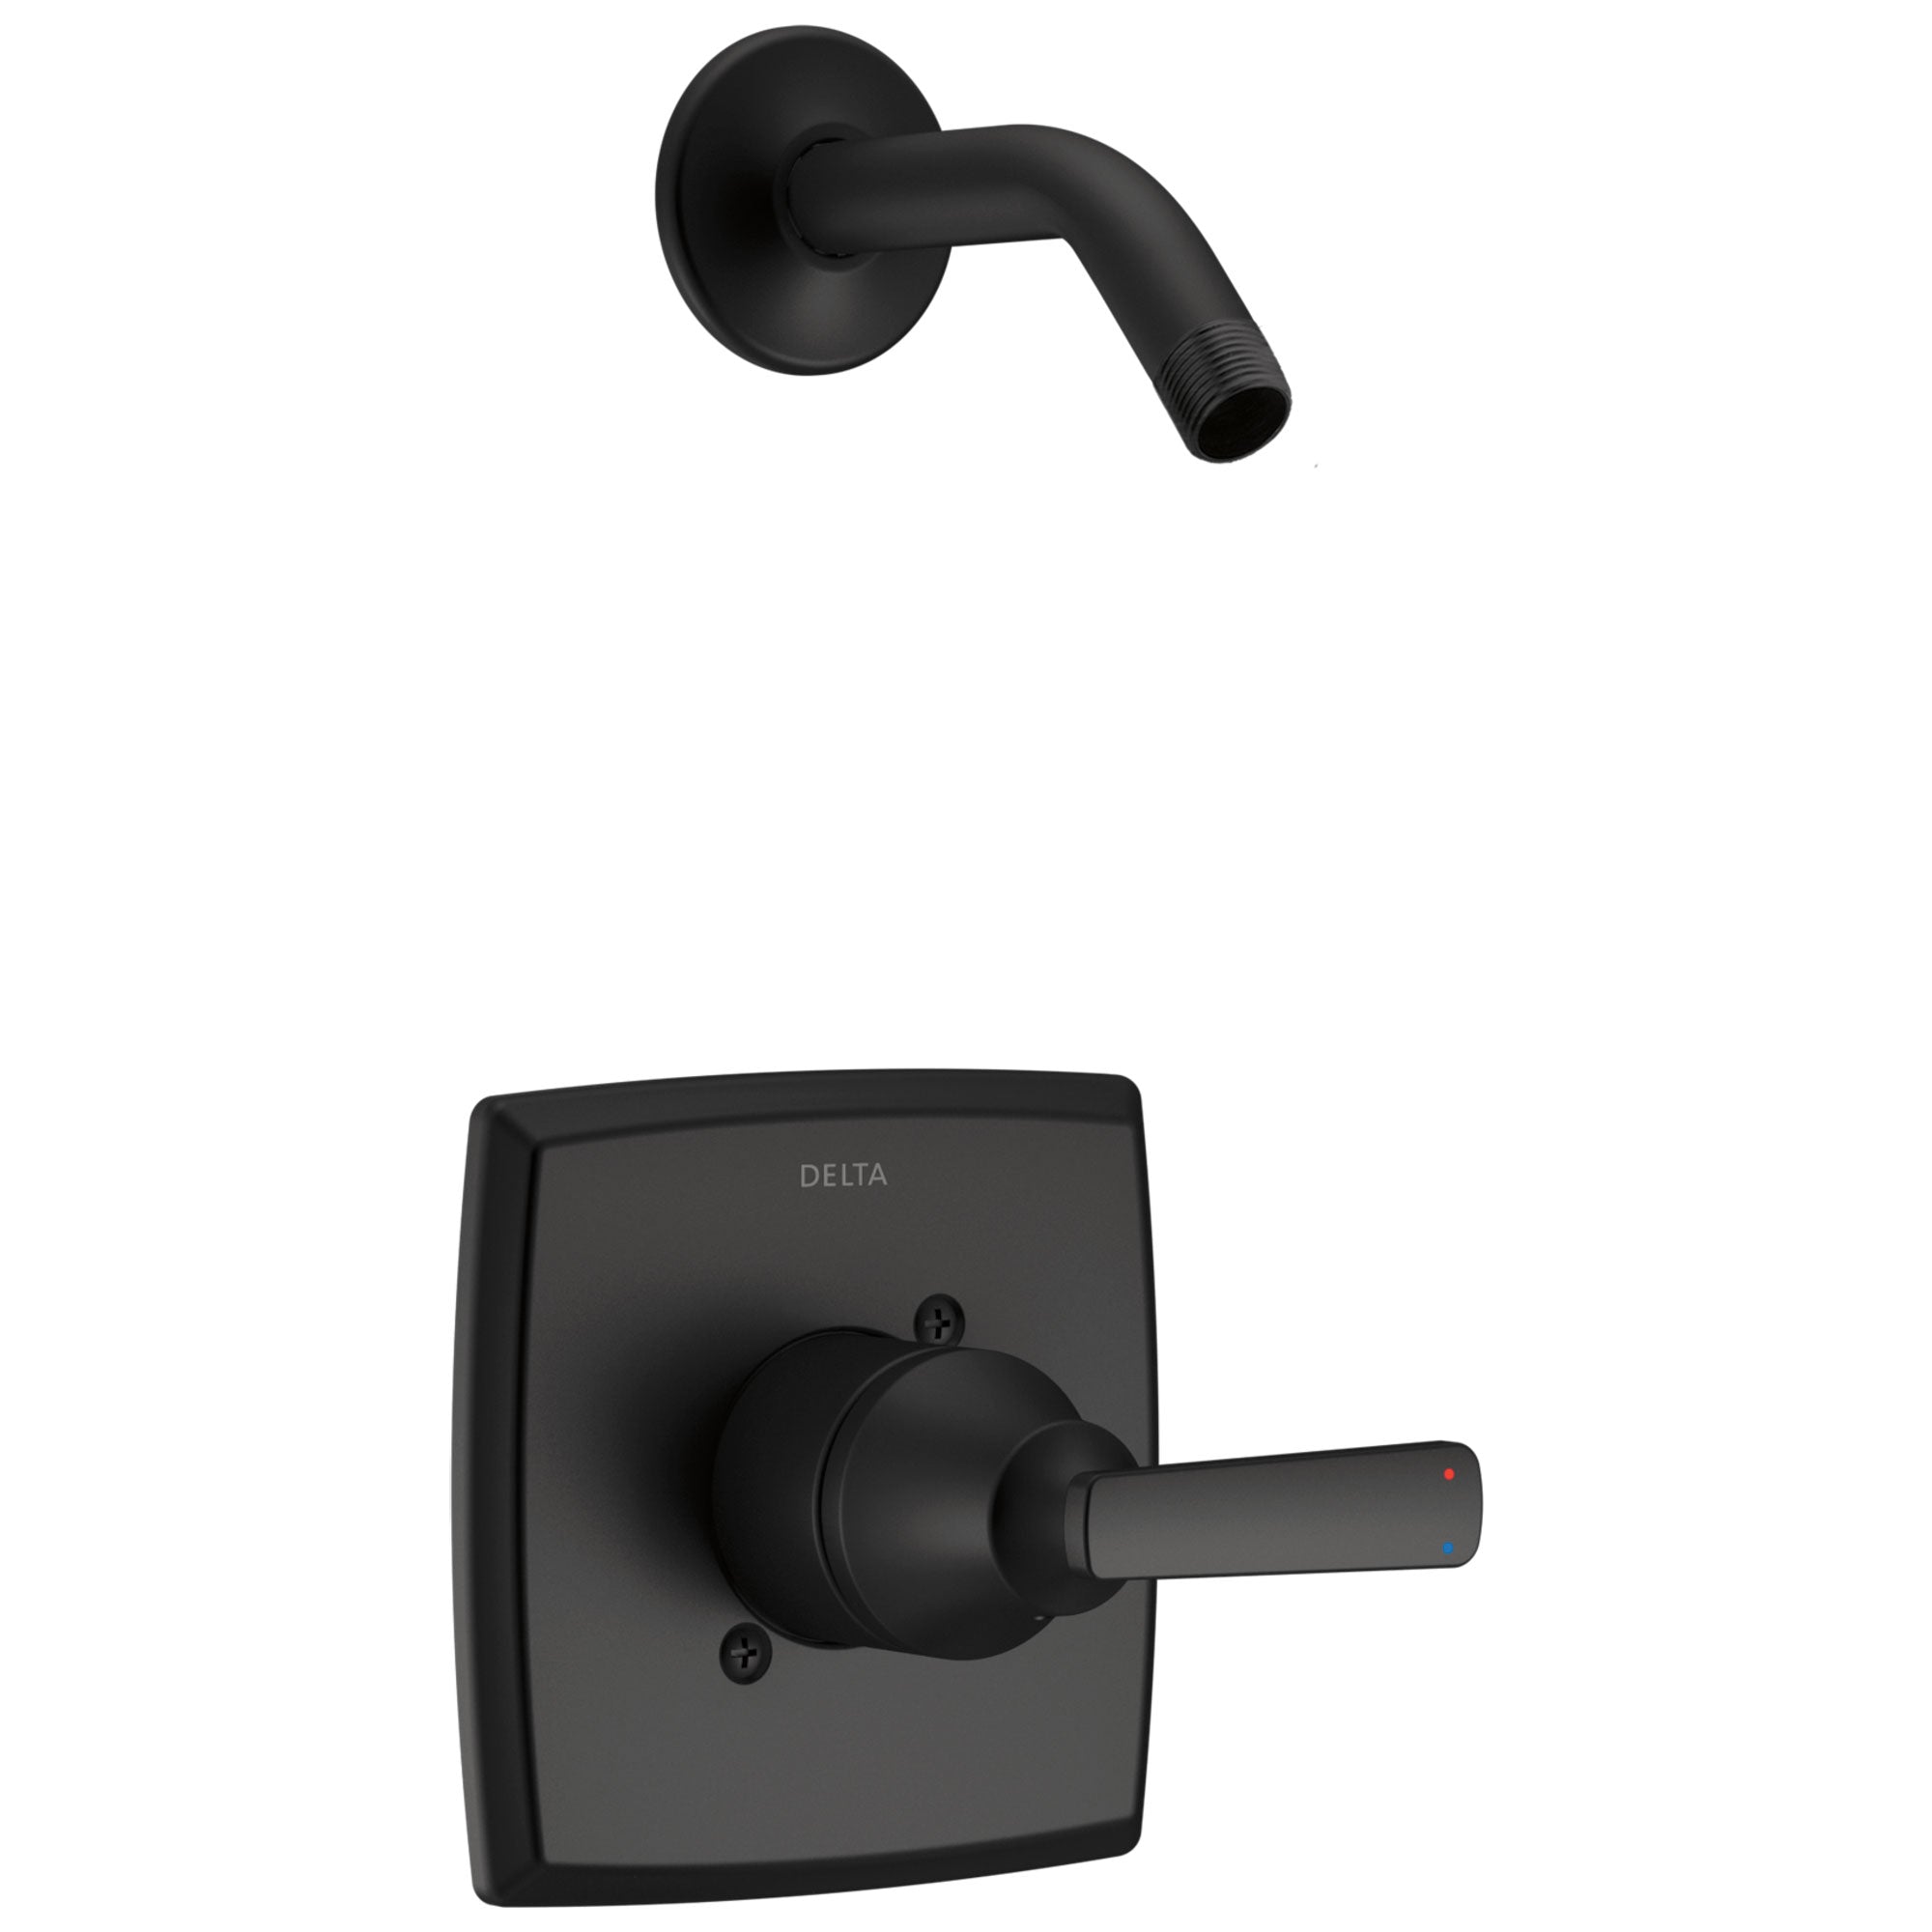 Delta Ashlyn Matte Black Finish Monitor 14 Series Shower Only Faucet Less Showerhead Includes Single Handle, Cartridge, and Valve with Stops D3504V